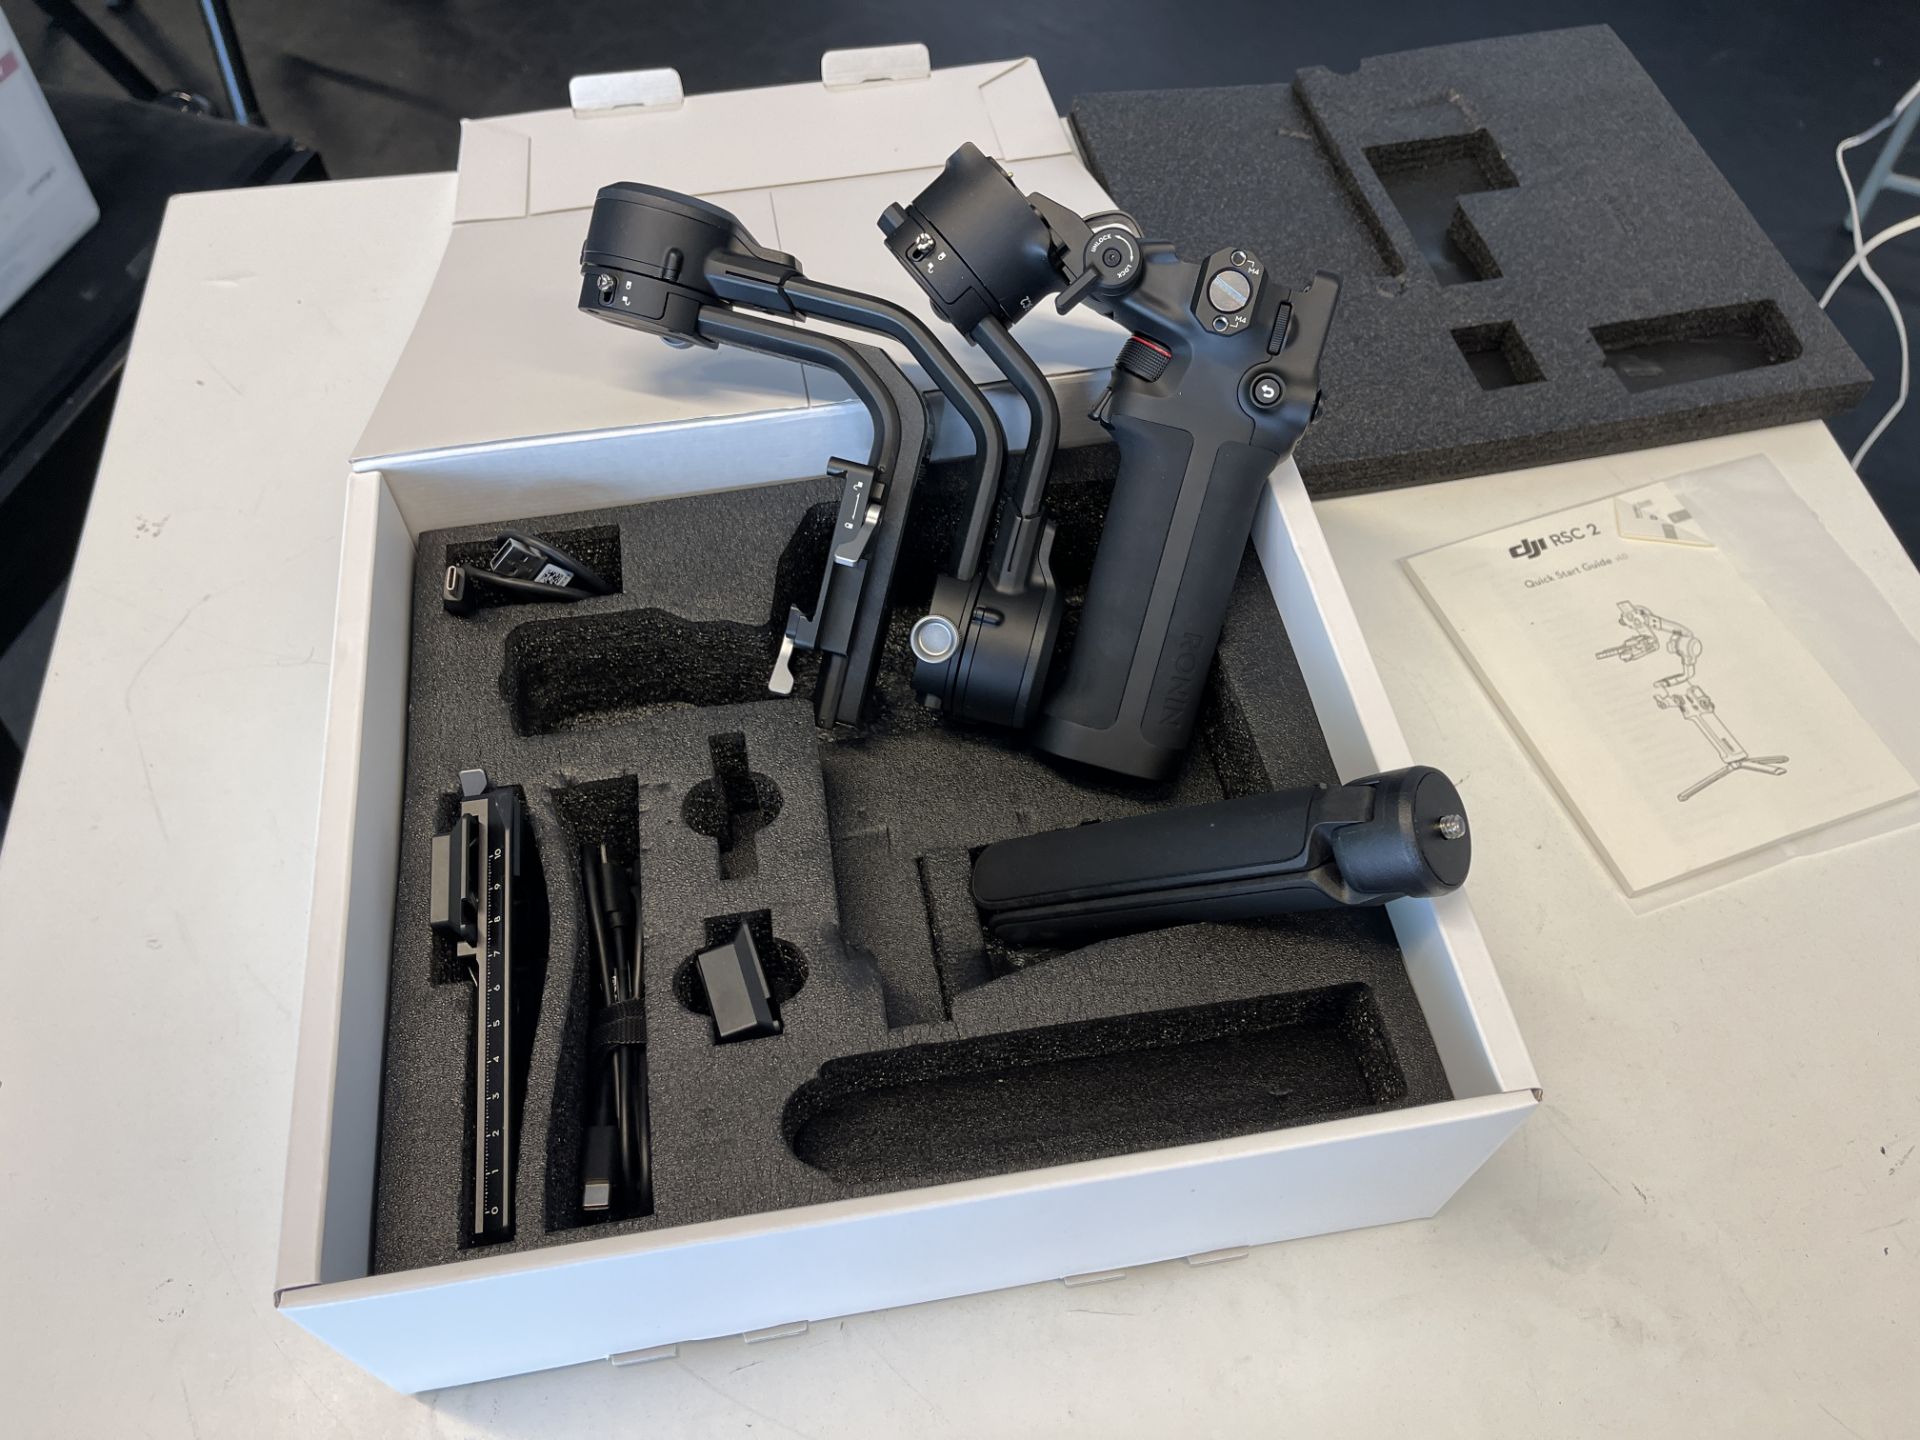 DJI RSC 2 Ronin Handheld Gimble Complete with Accessories & Case (RRP £400) - Image 5 of 9